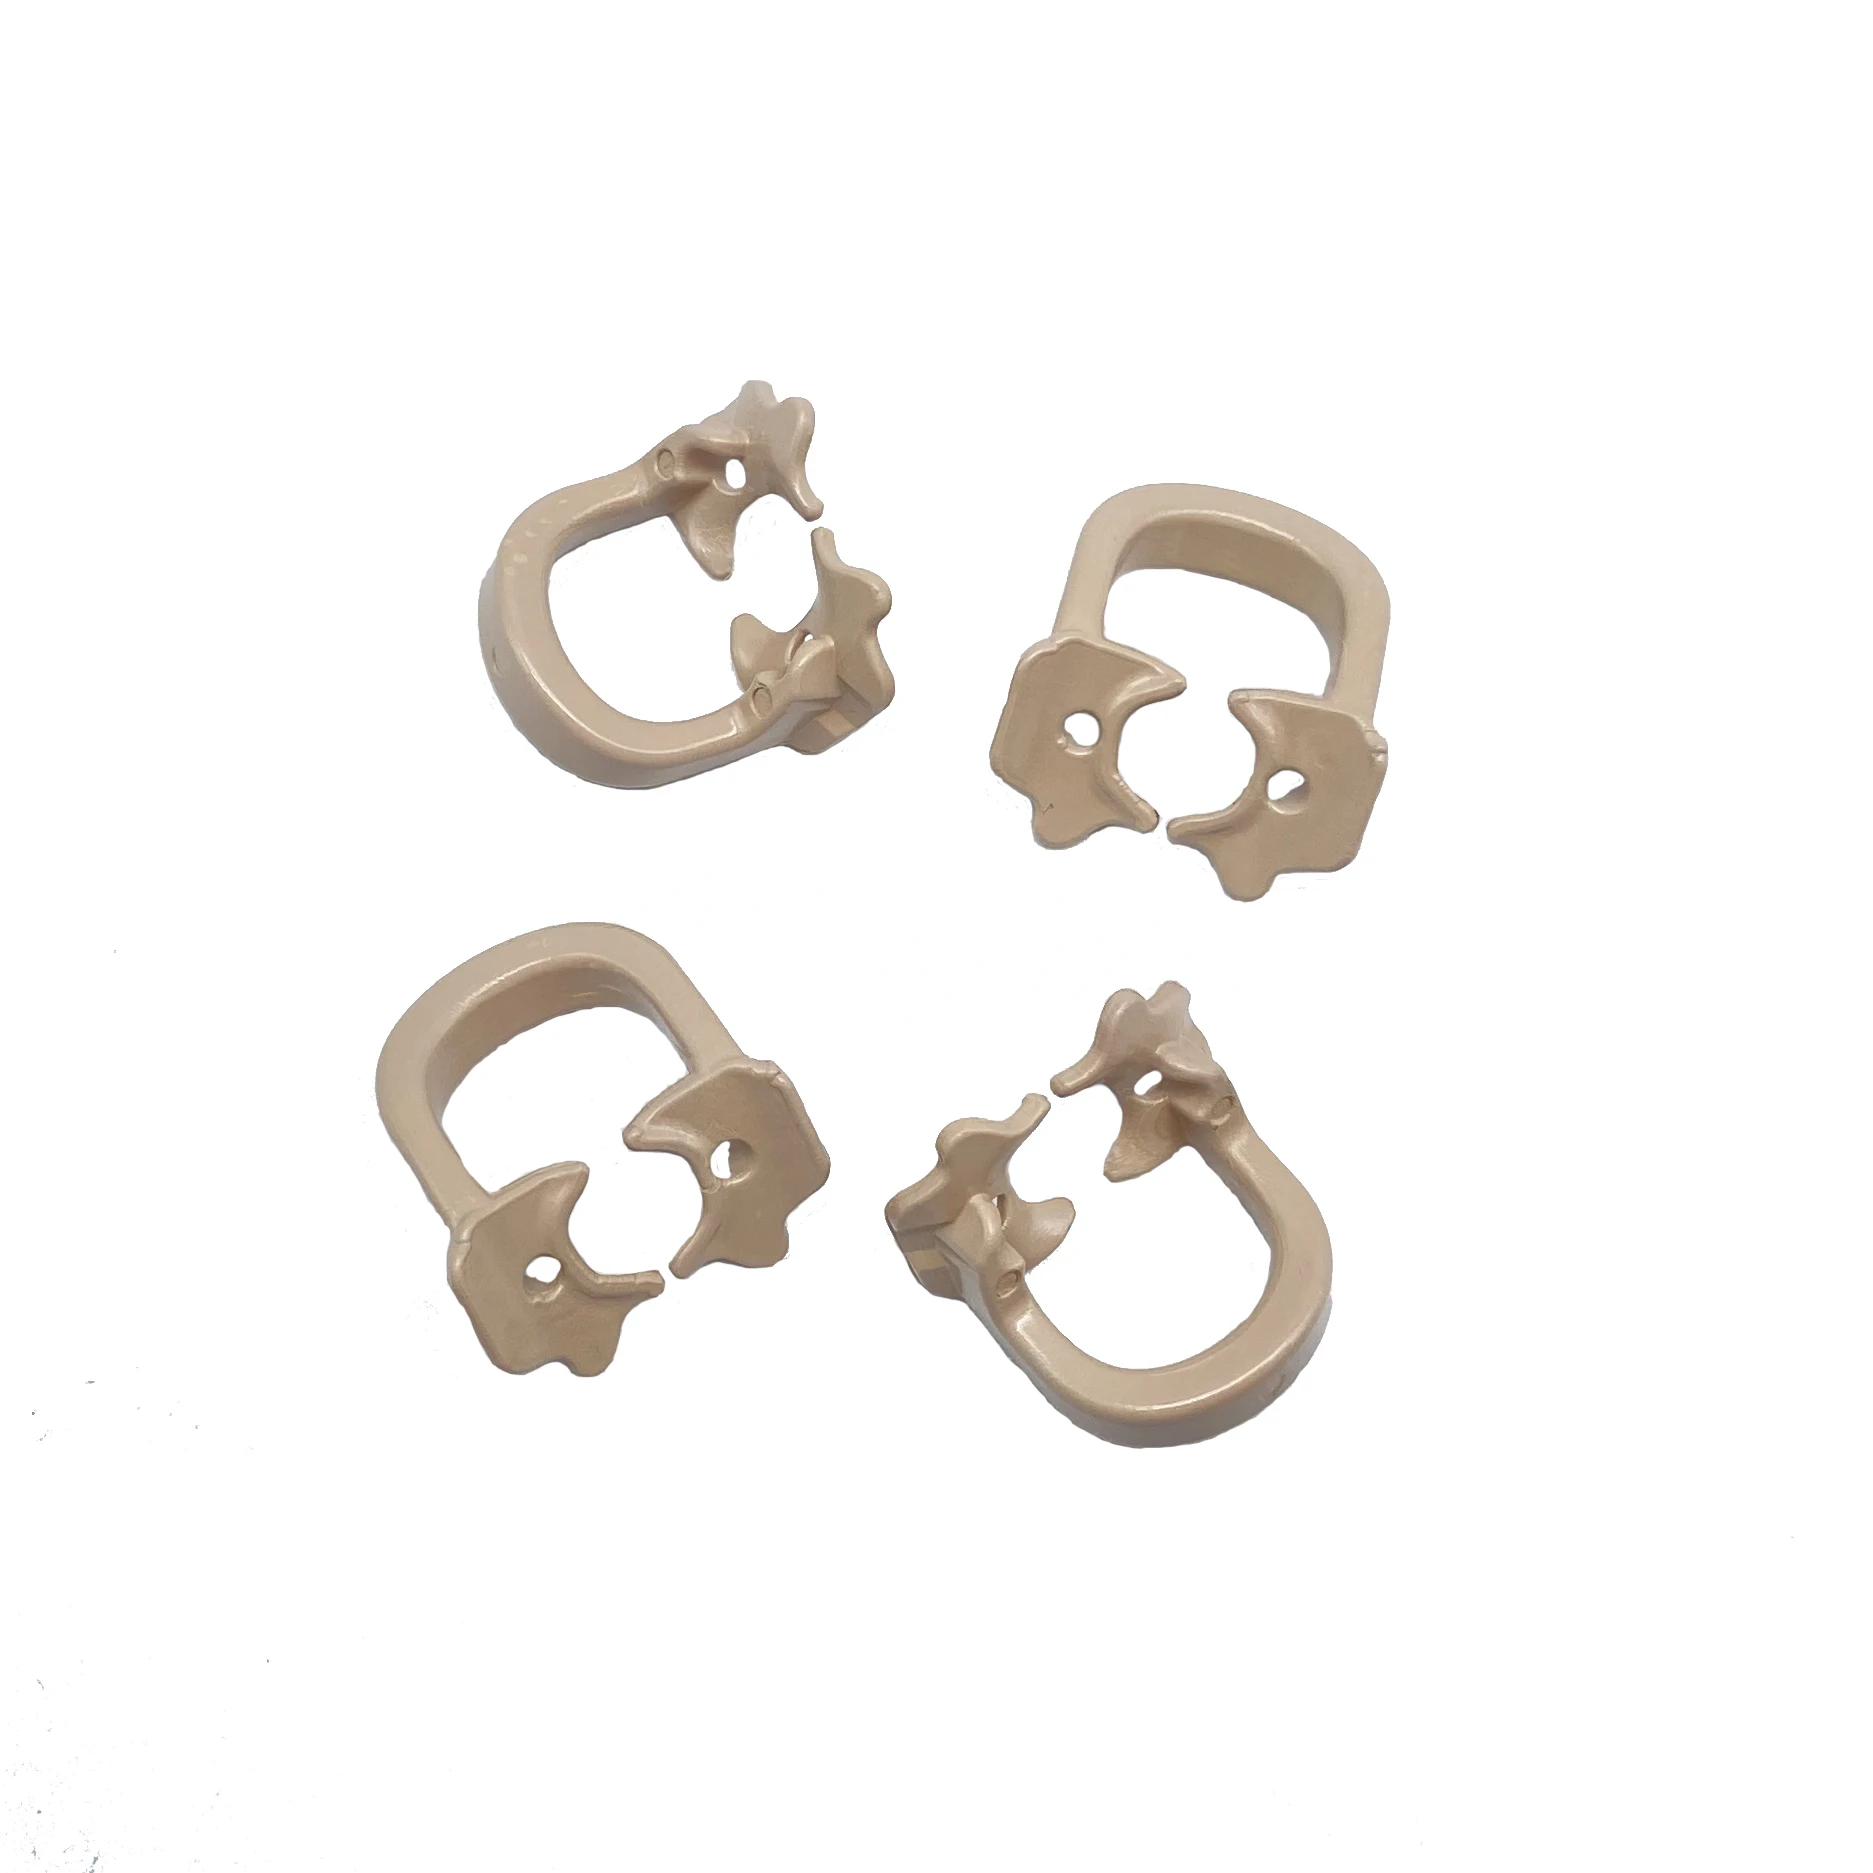 

4 Pieces Dental Rubber Dam Sheets Clamps Clip Soft Resin Molar Premolar Clamp Isolation Kerr Style